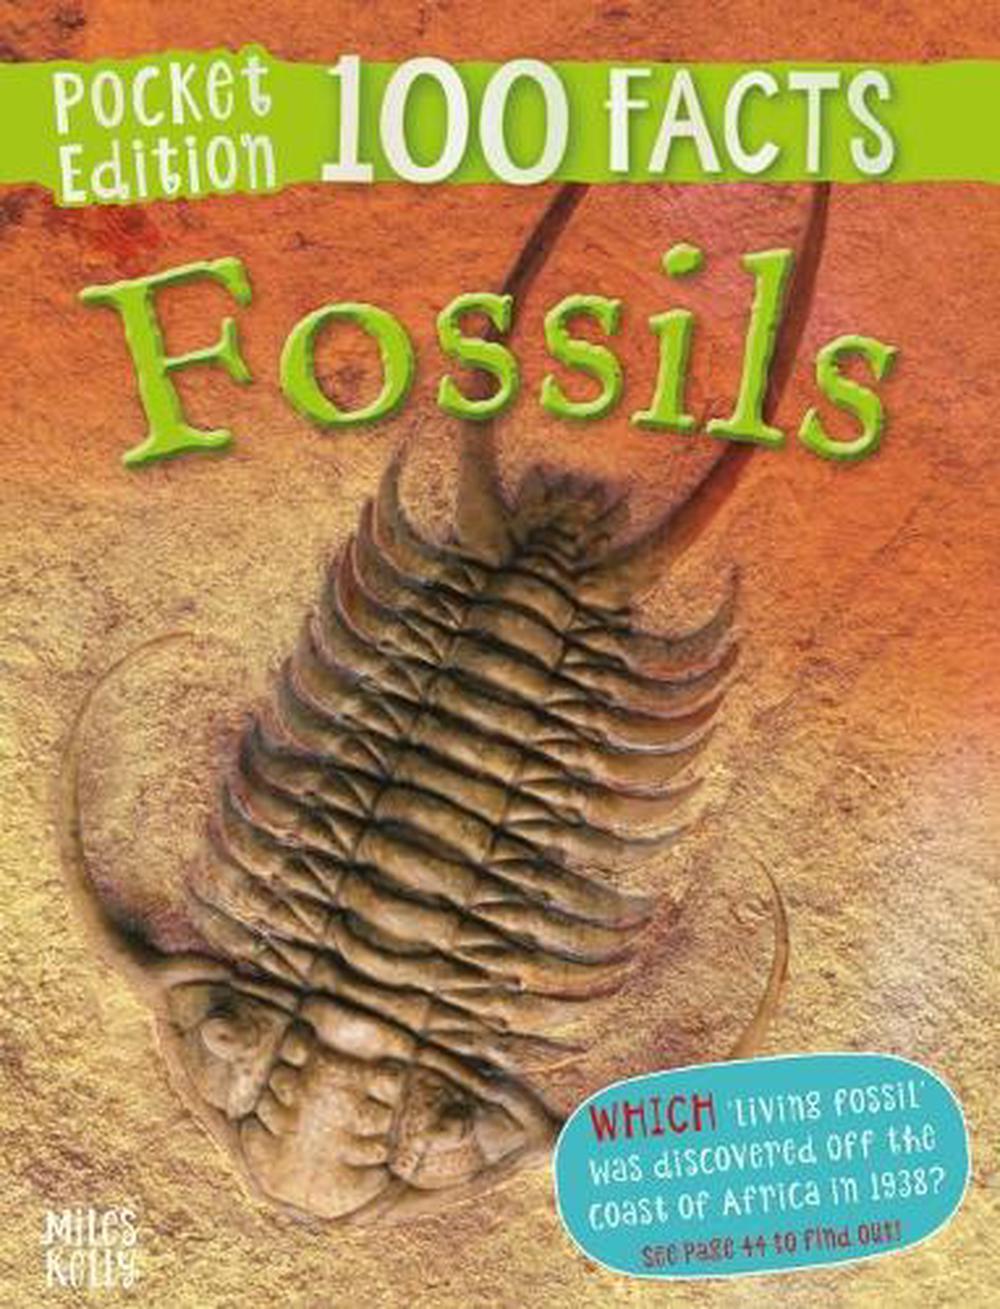 Fossils by Steve Parker (English) Paperback Book Free Shipping ...